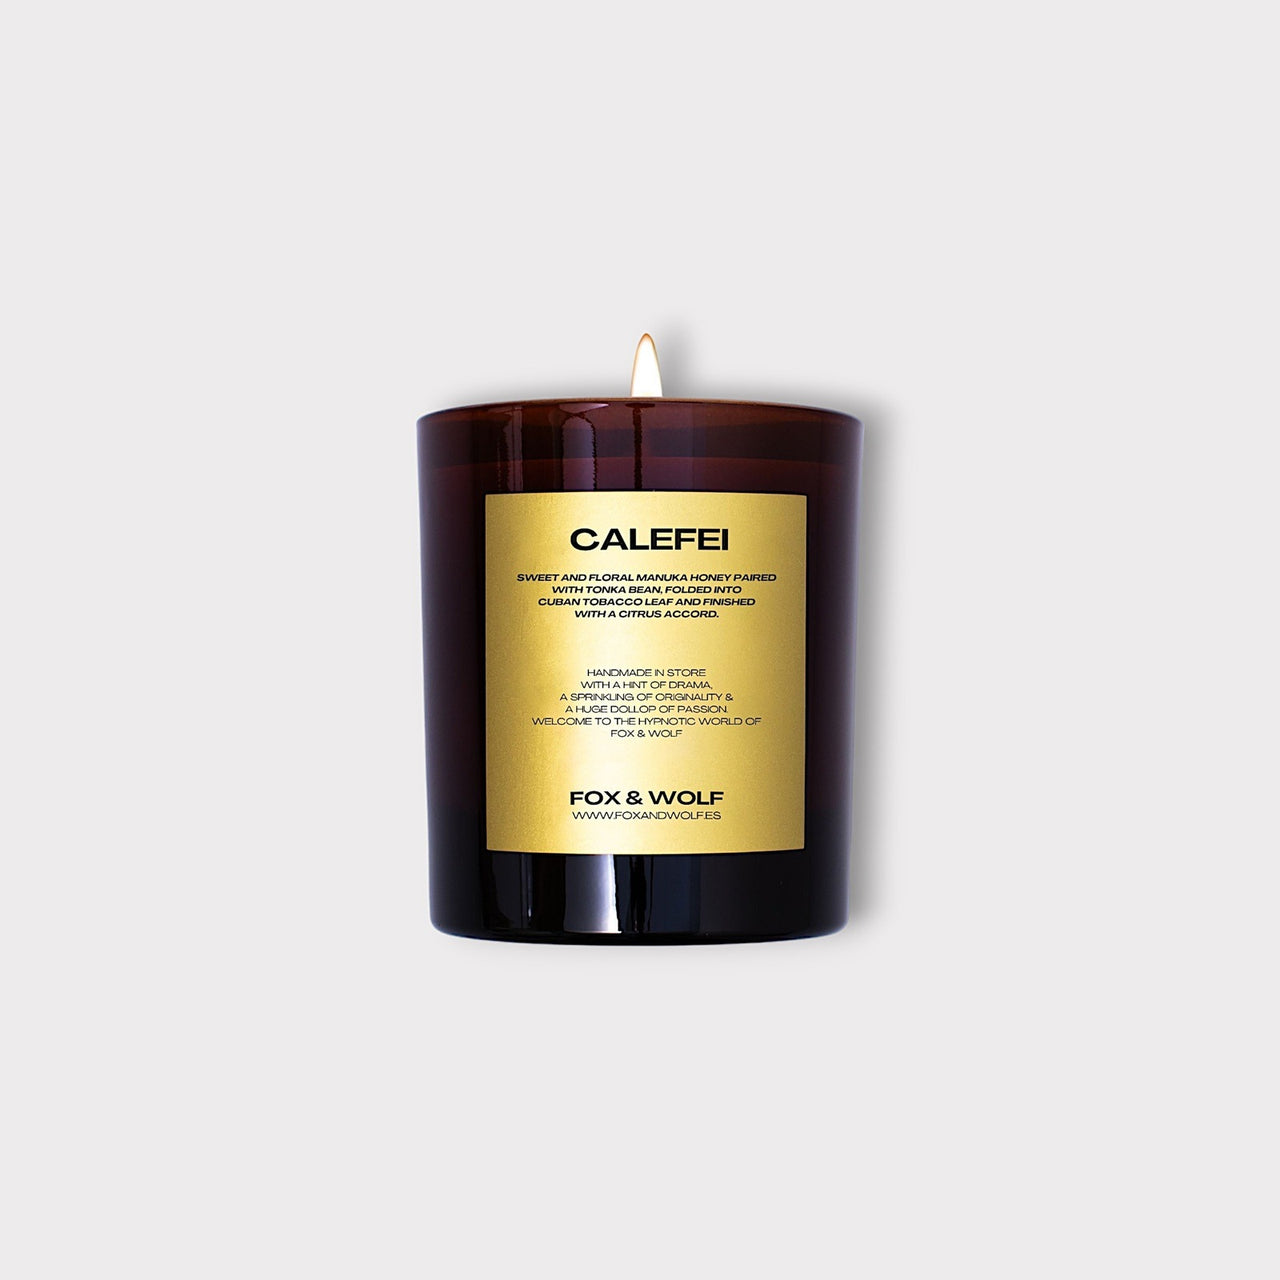 300 G CALEFEI SCENTED CANDLE